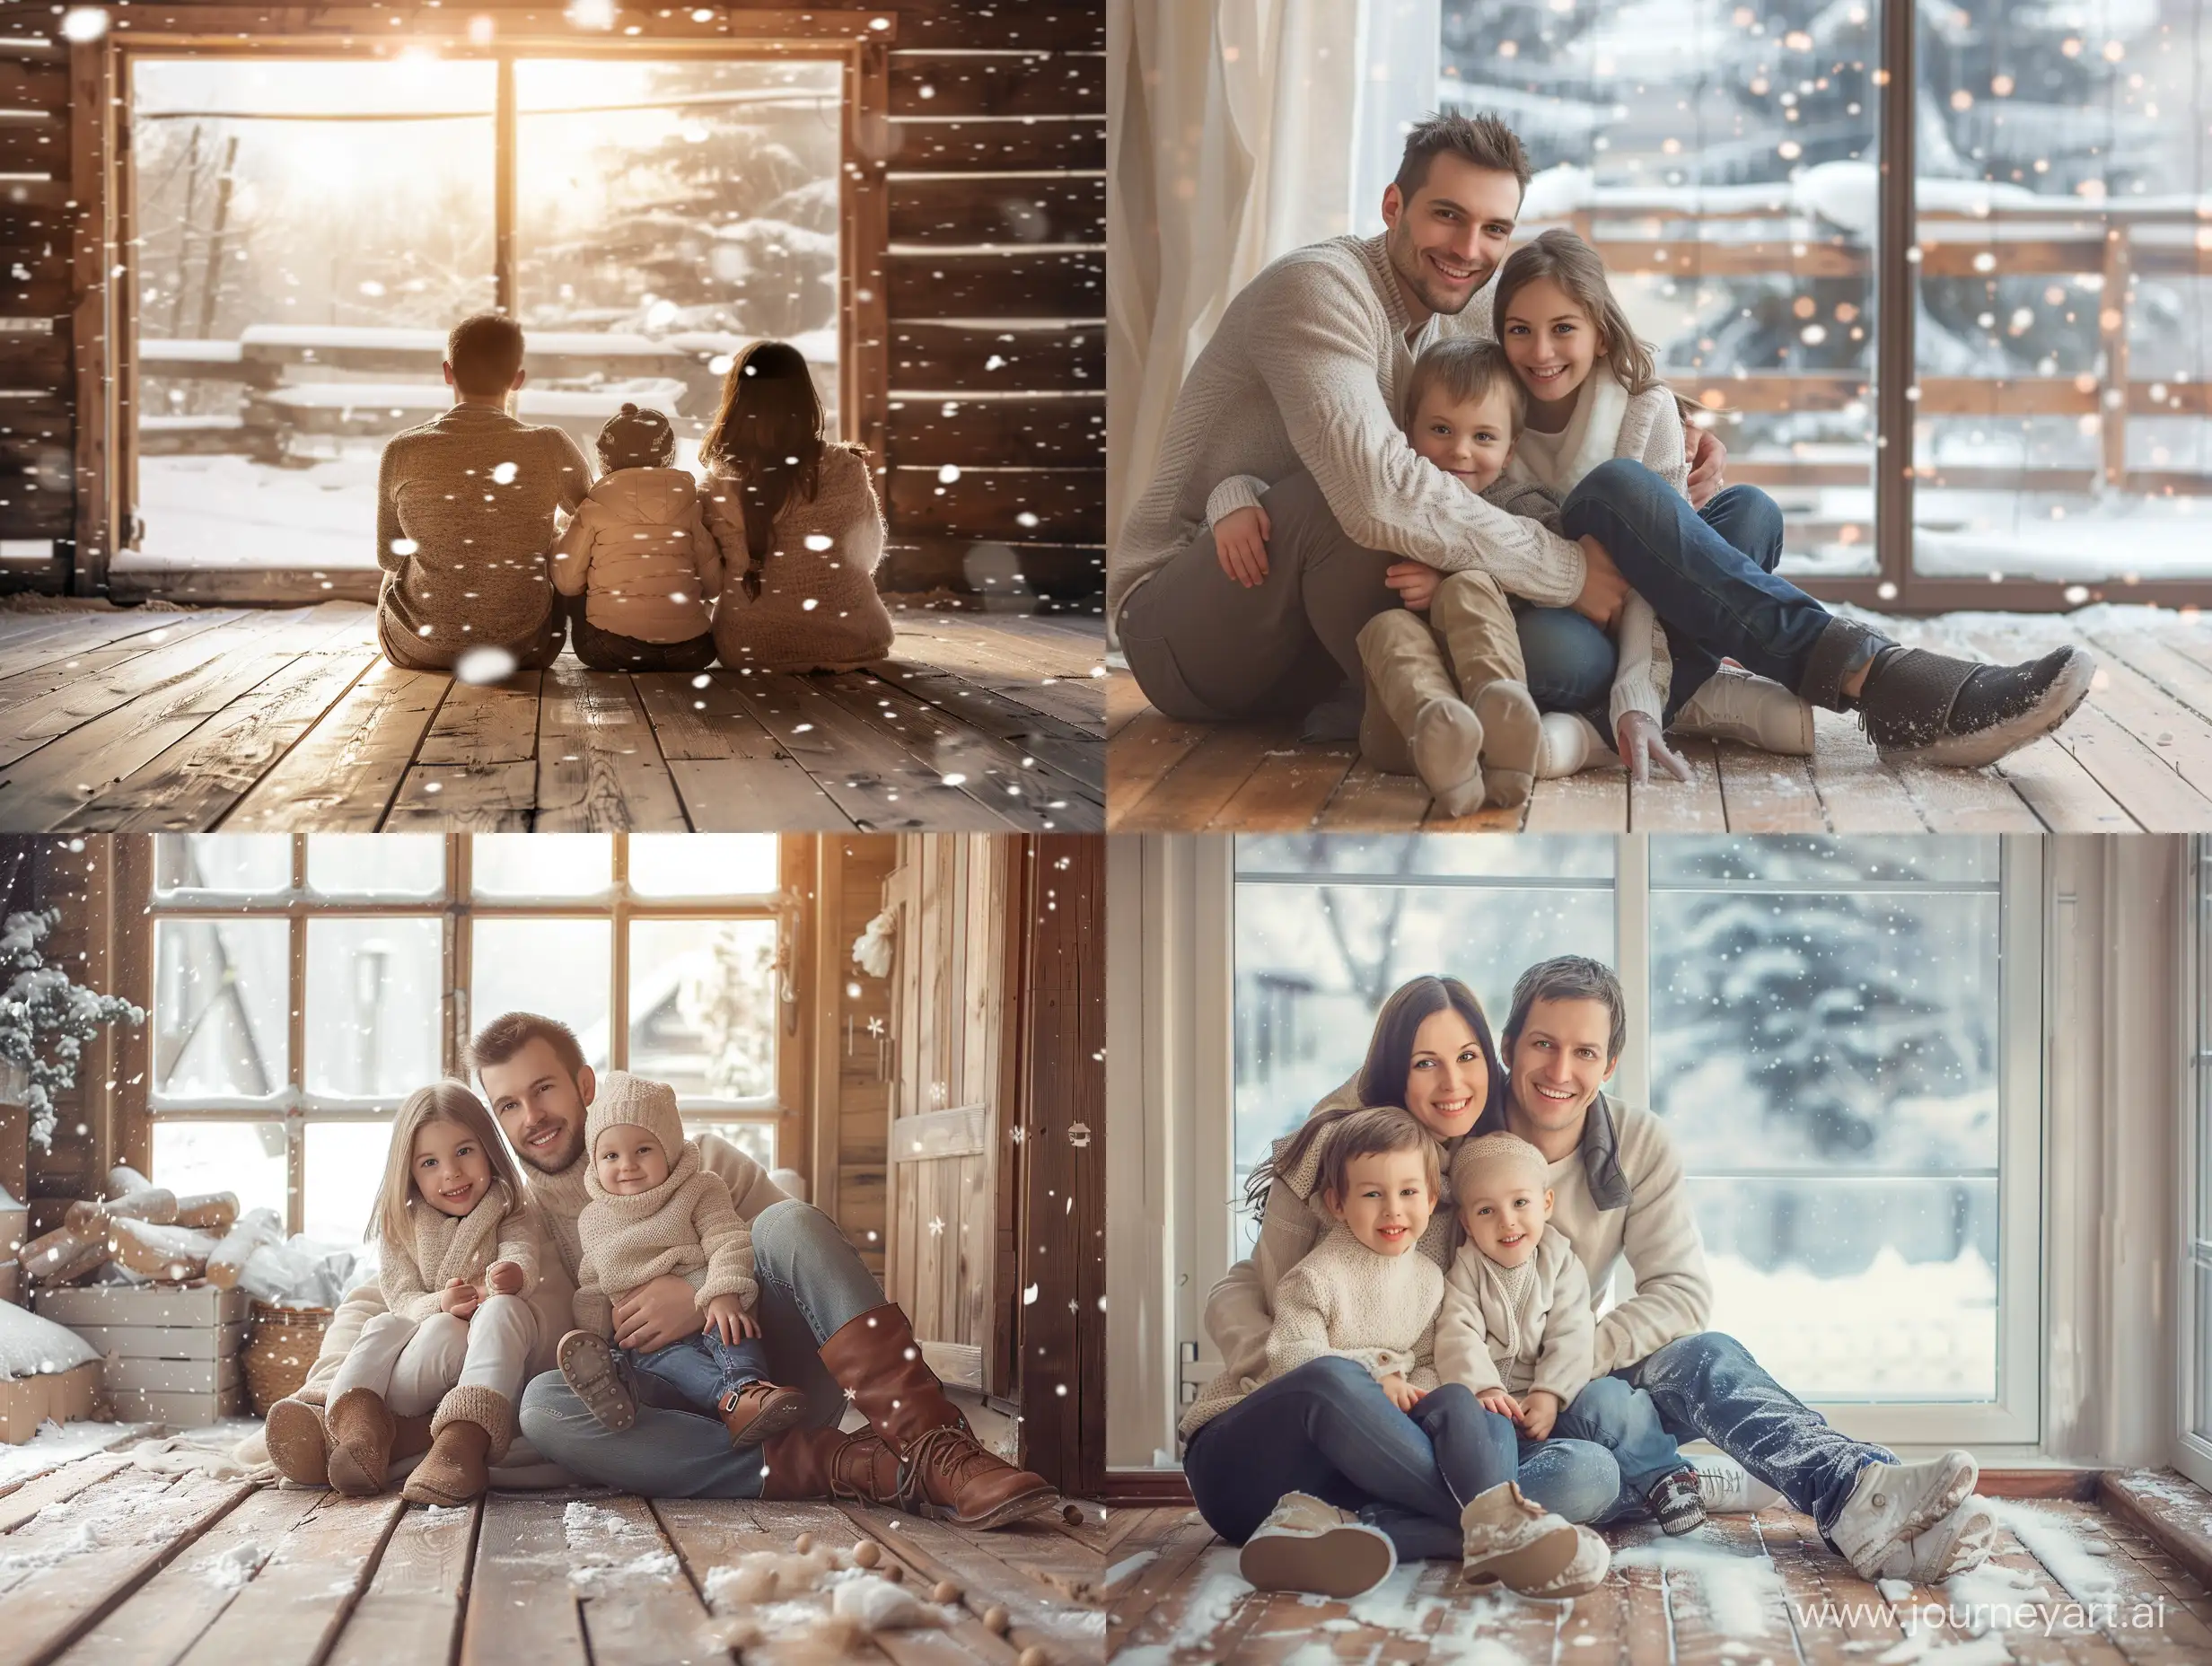 happy family sitting on a wooden warm floor in a house, in the background big window, it snows outside. warm style picture